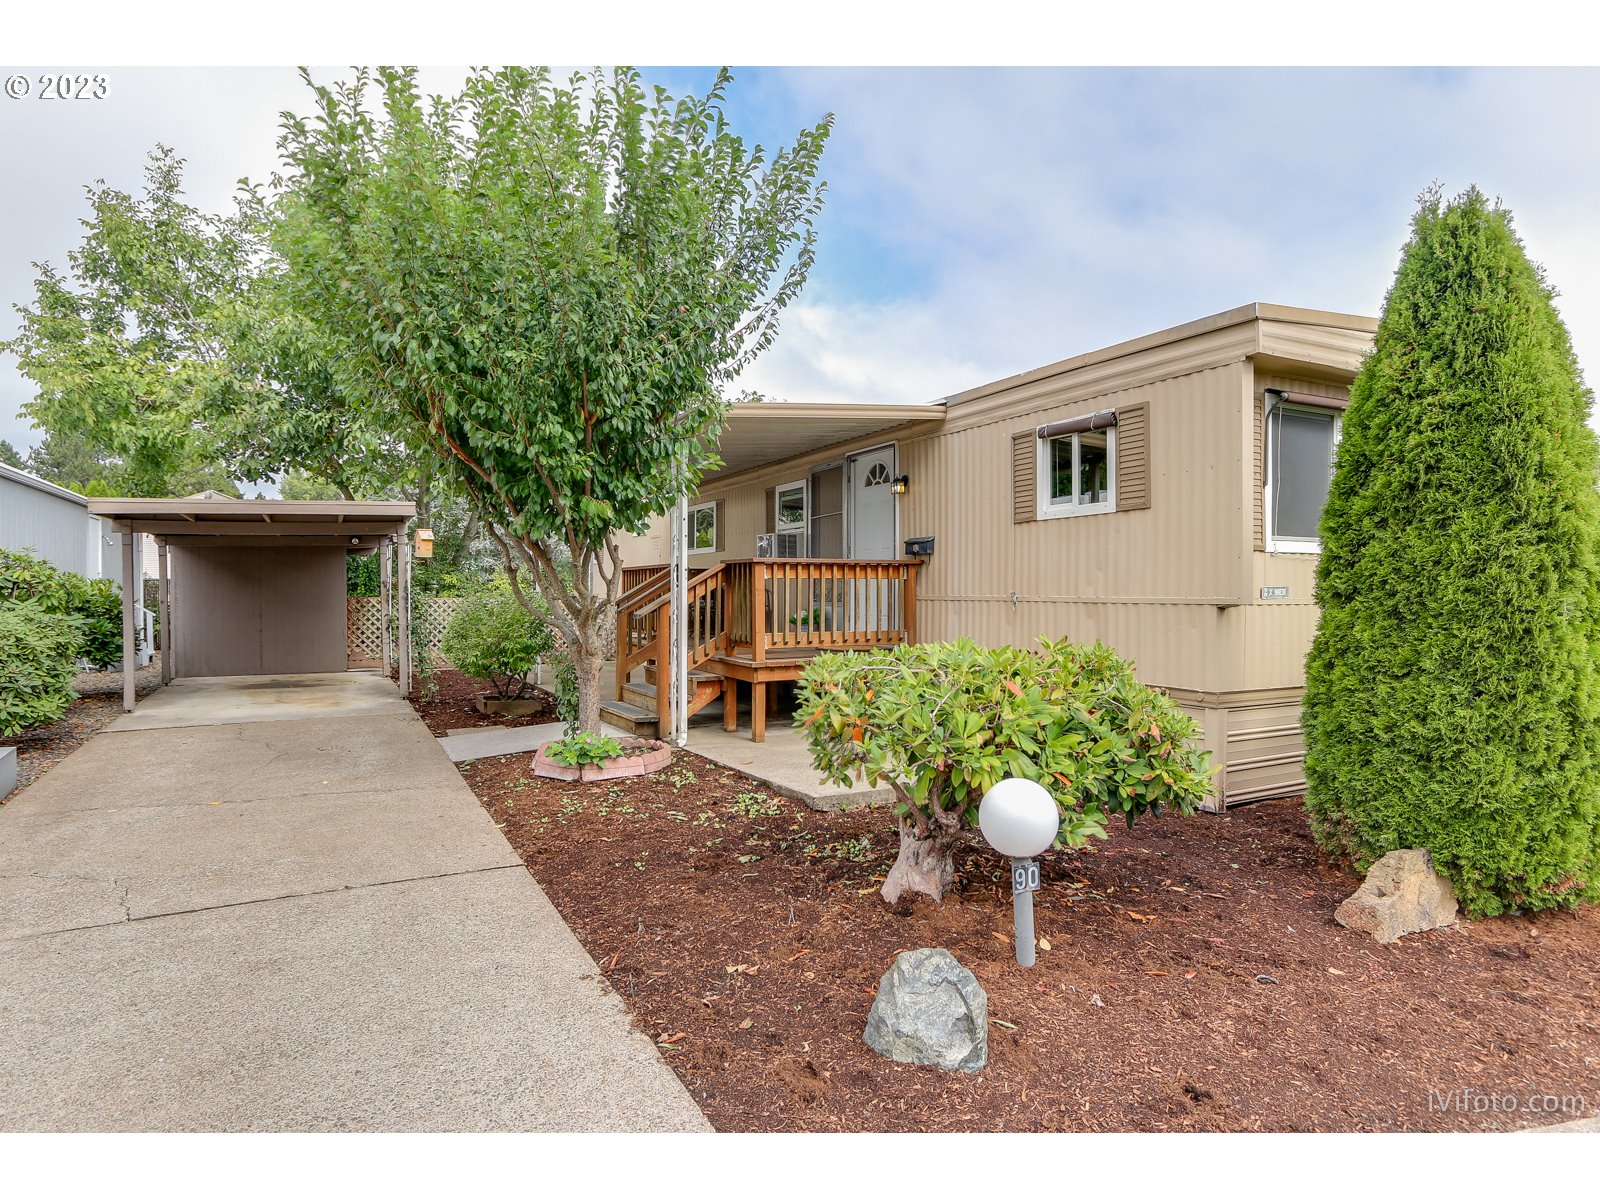 Charming 2 bedroom, 1 bath home in the Monta Loma 55+ Park. Nice updating in kitchen, vinyl windows, wall AC, and new carpet as of Sept 2023. Appliances stay with the home: fridge, stove & washer/dryer. Fenced yard, carport, deck & tool shed. Space rent is $900/mo and park approval needed as part of an acceptable offer. Park amenities include: dog park, meeting room, exercise room, and a library. Open Sat & Sun 1-3pm.